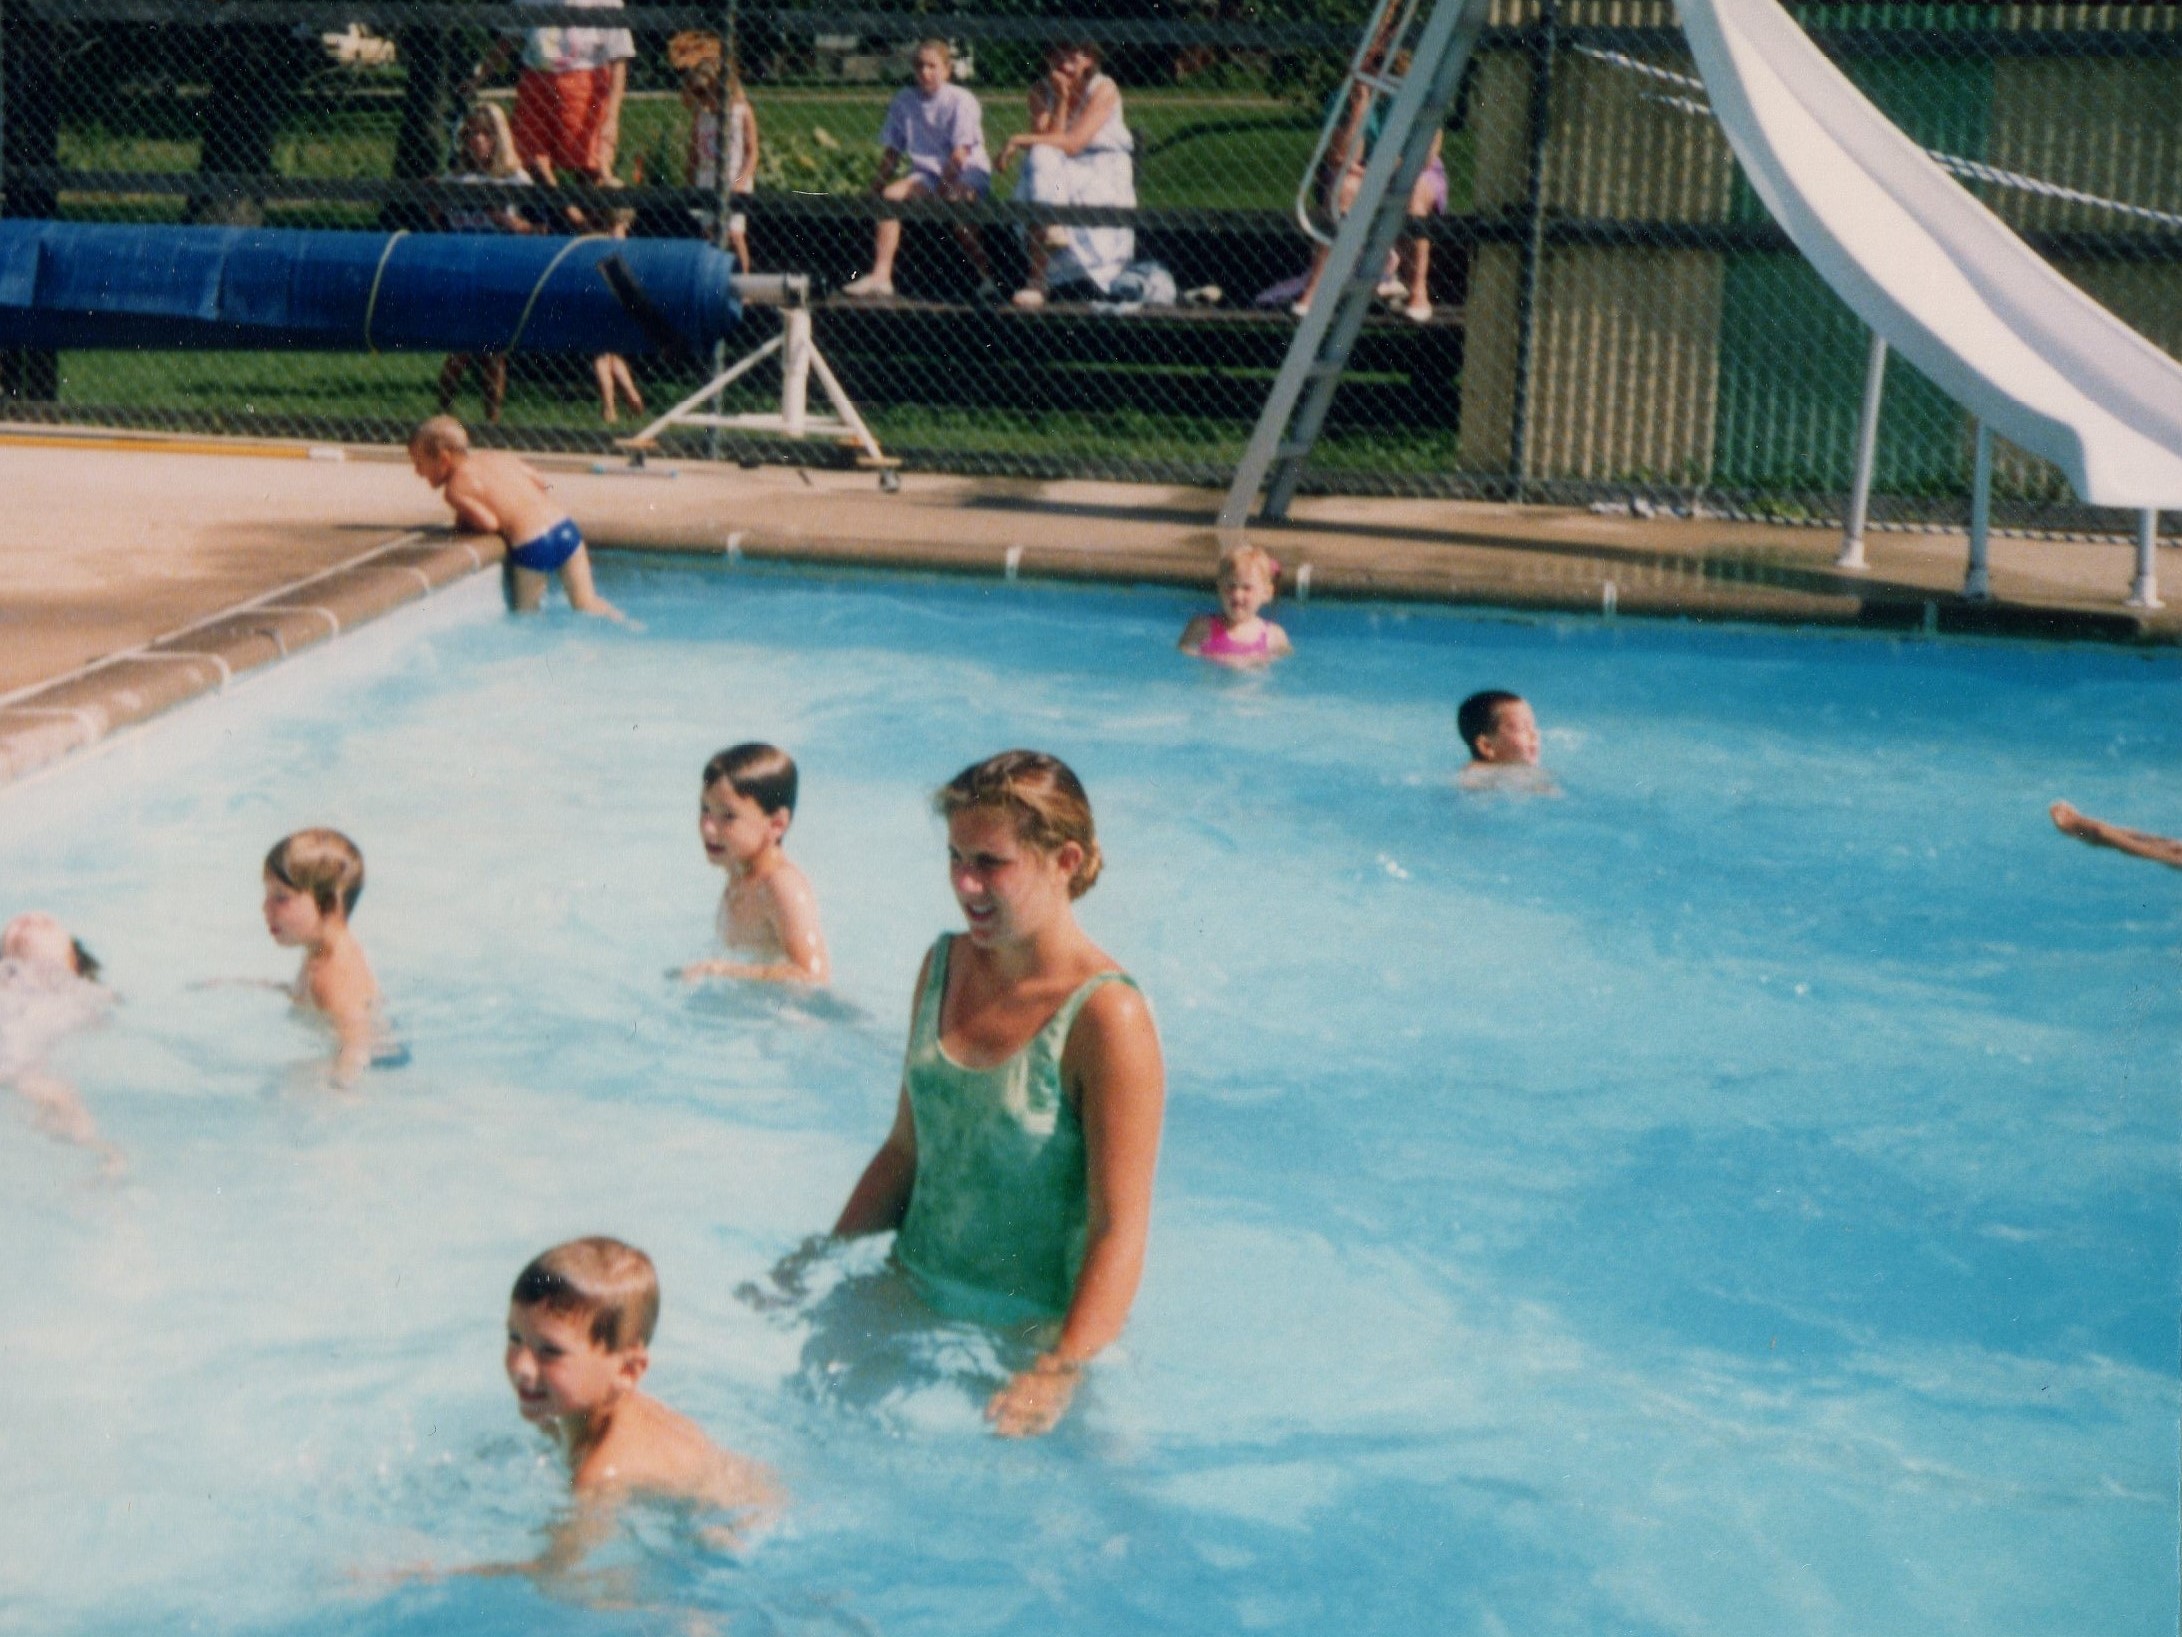 1990 Swimming lessons - the beginners